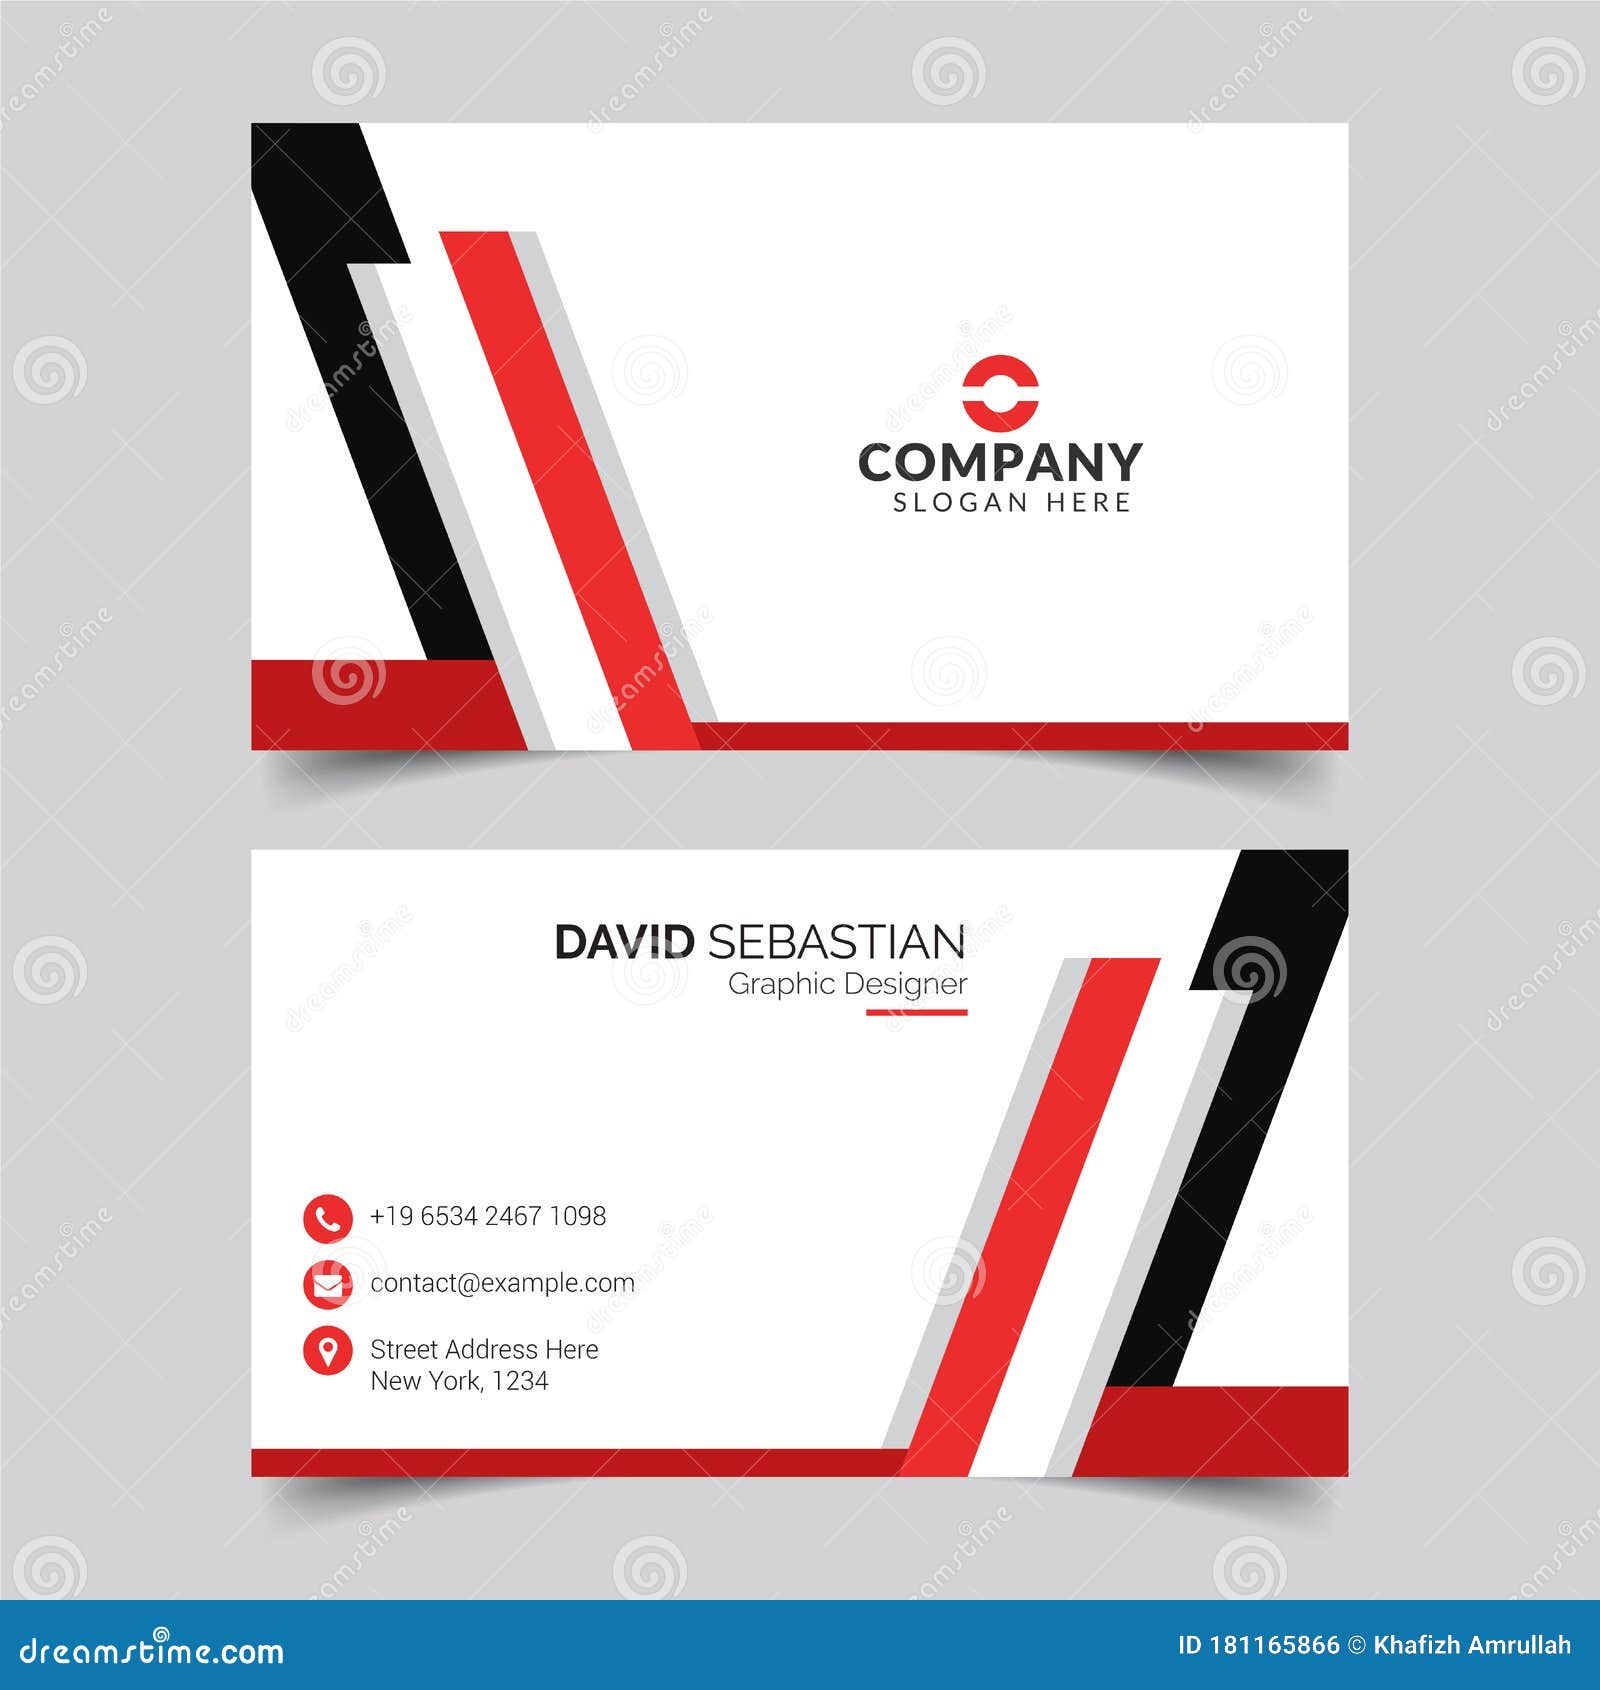 Modern and Clean Business Card Design Template. Minimal Corporate Intended For Office Max Business Card Template